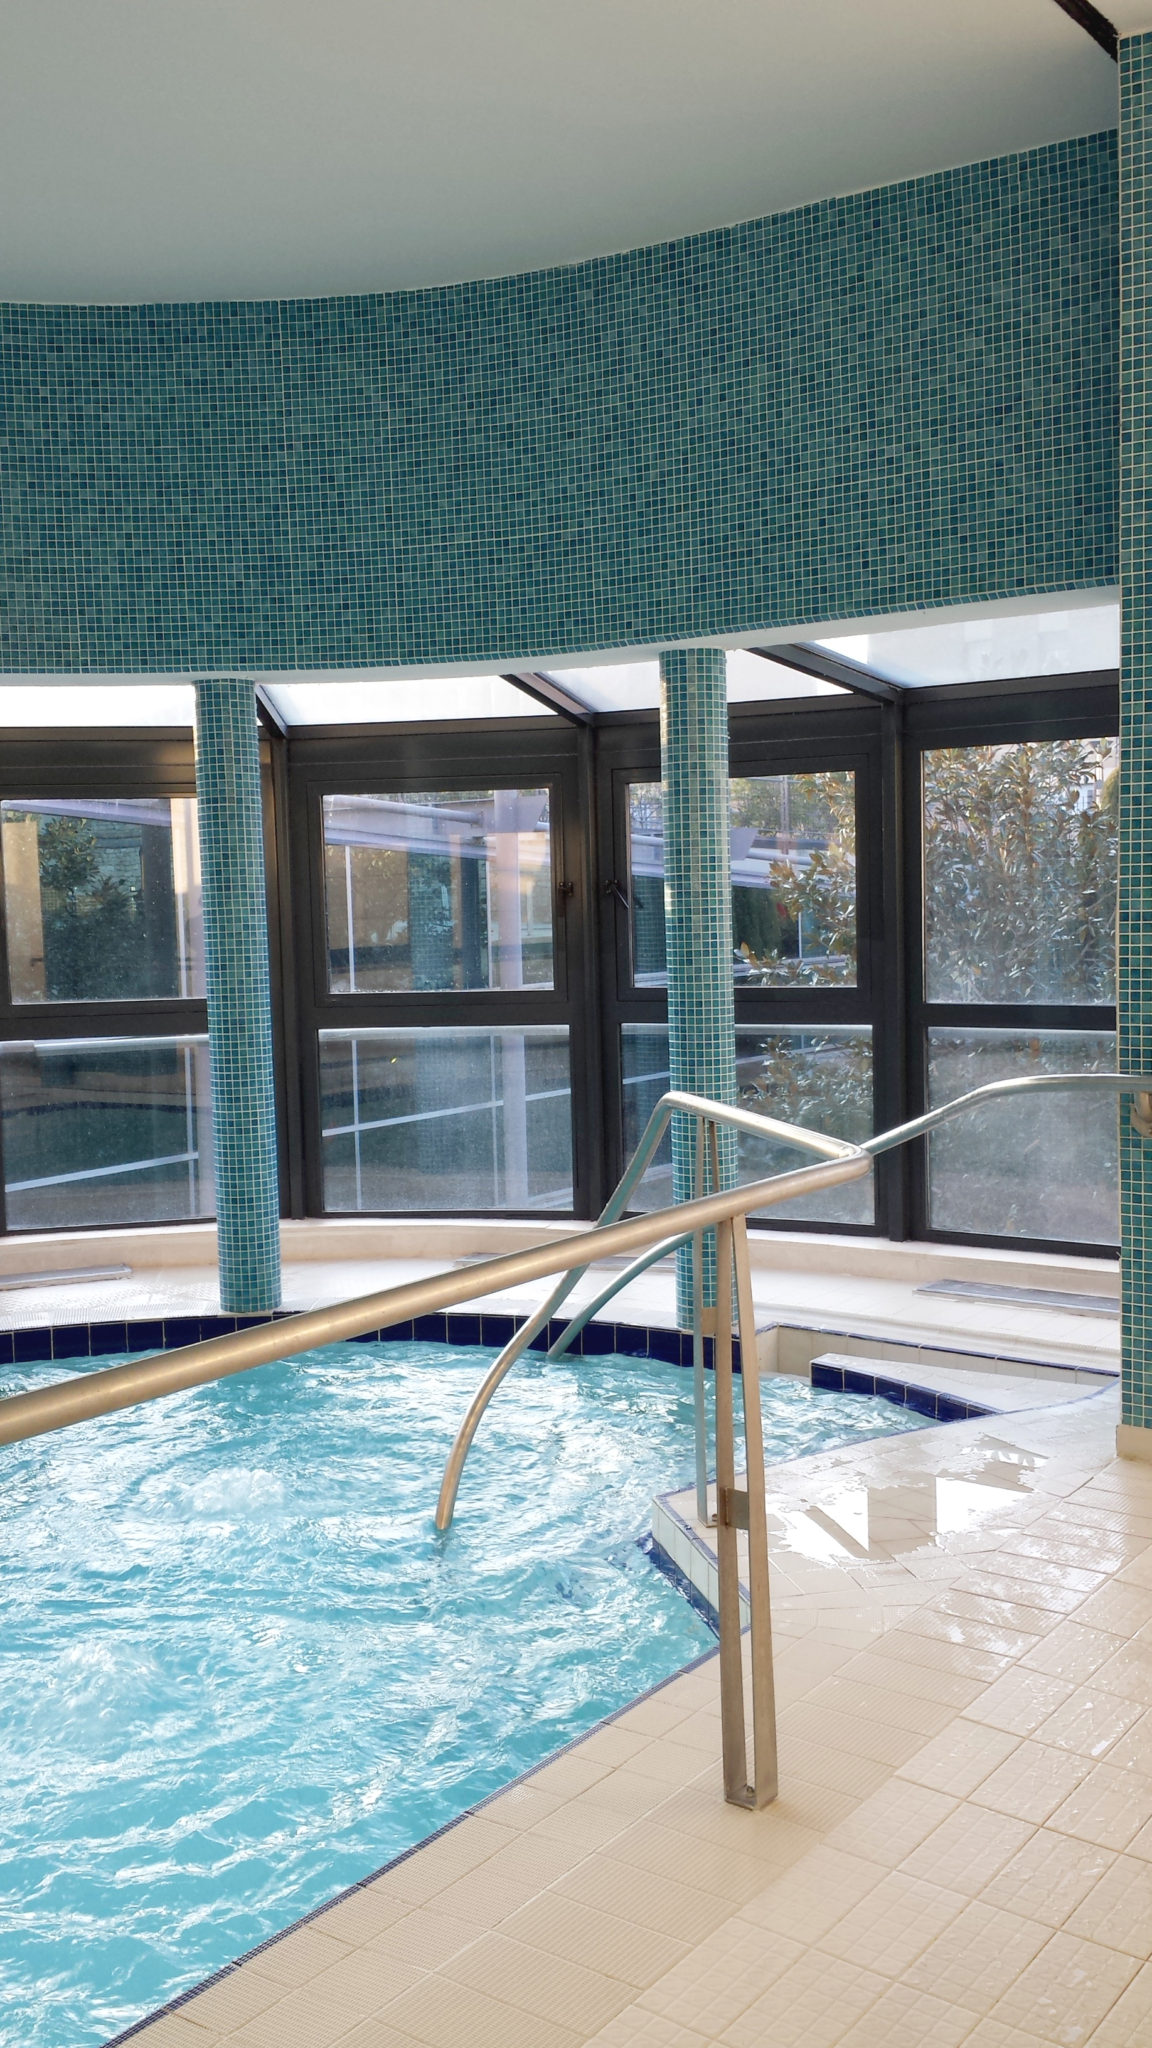 Journee_cocooning_aixenprovence_spa_thermes_sextius_jacuzzi_3